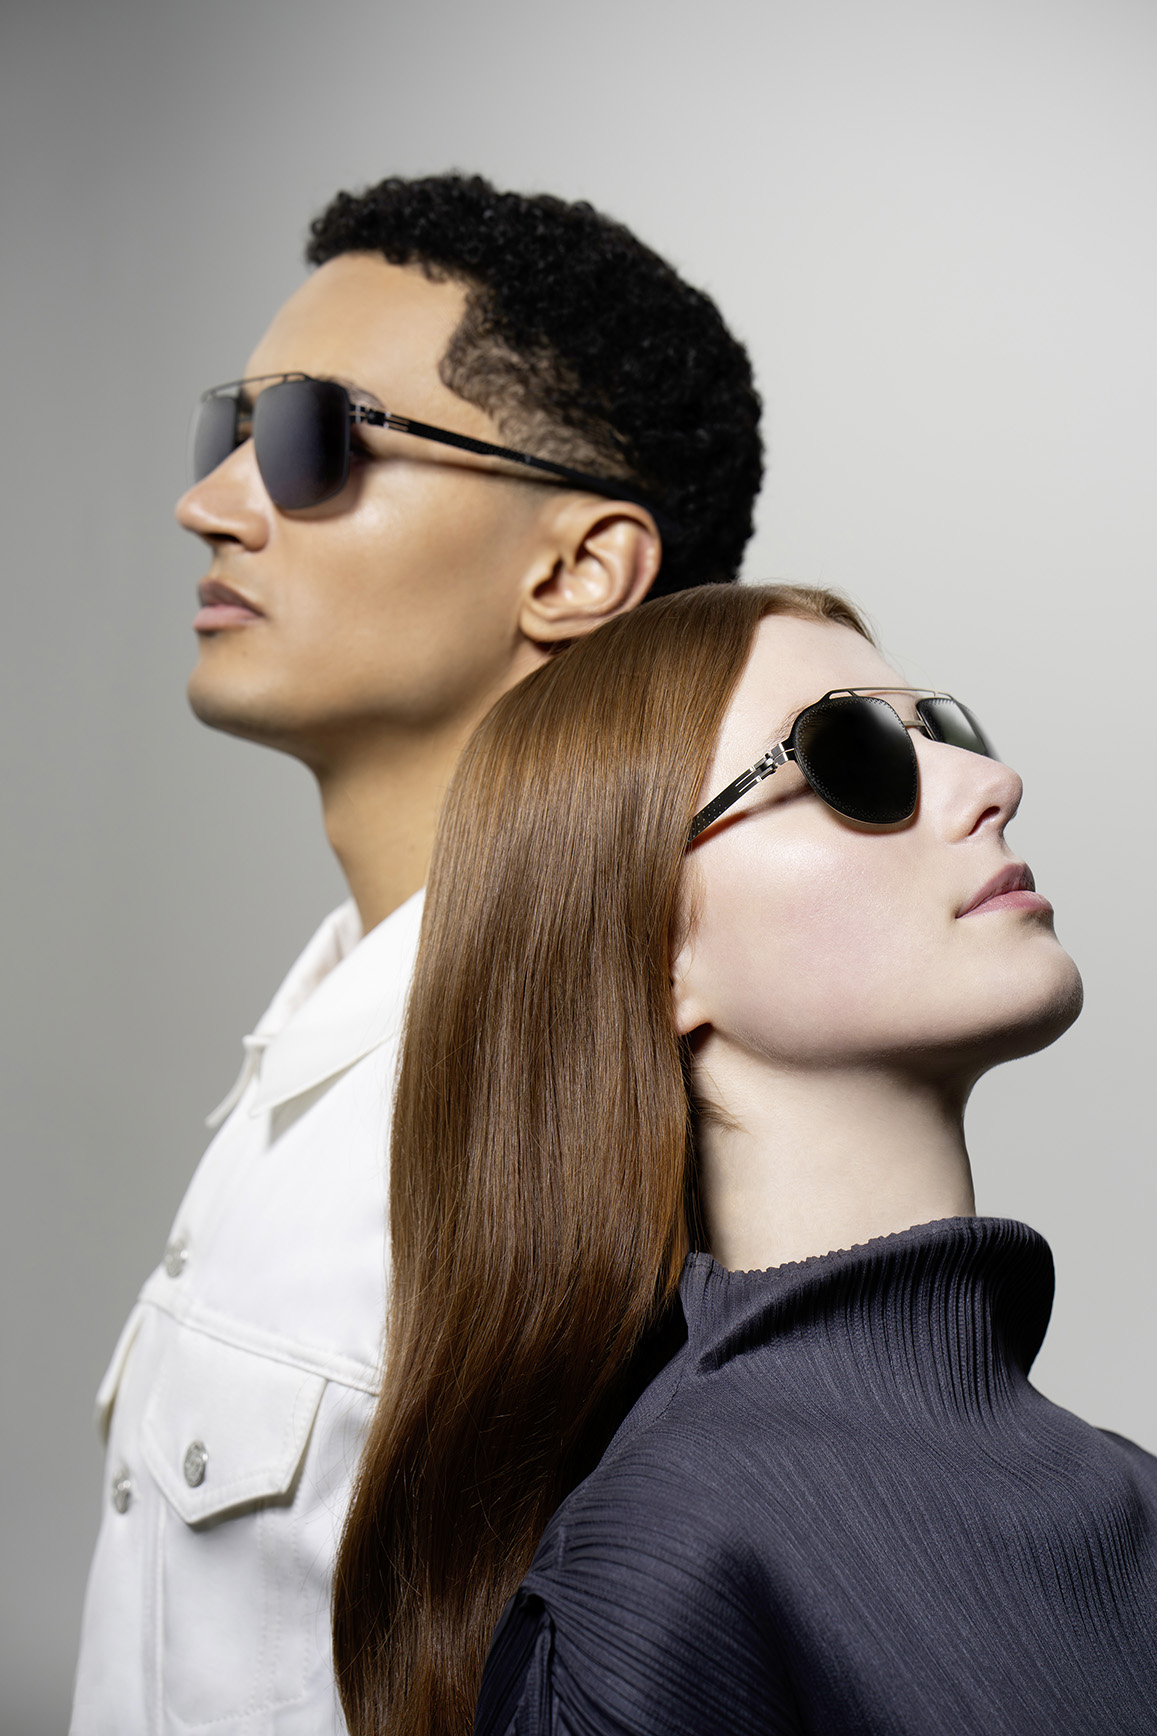 New Eyewear Collection from Mercedes-Benz, Mercedes-AMG, and ic! Berlin
